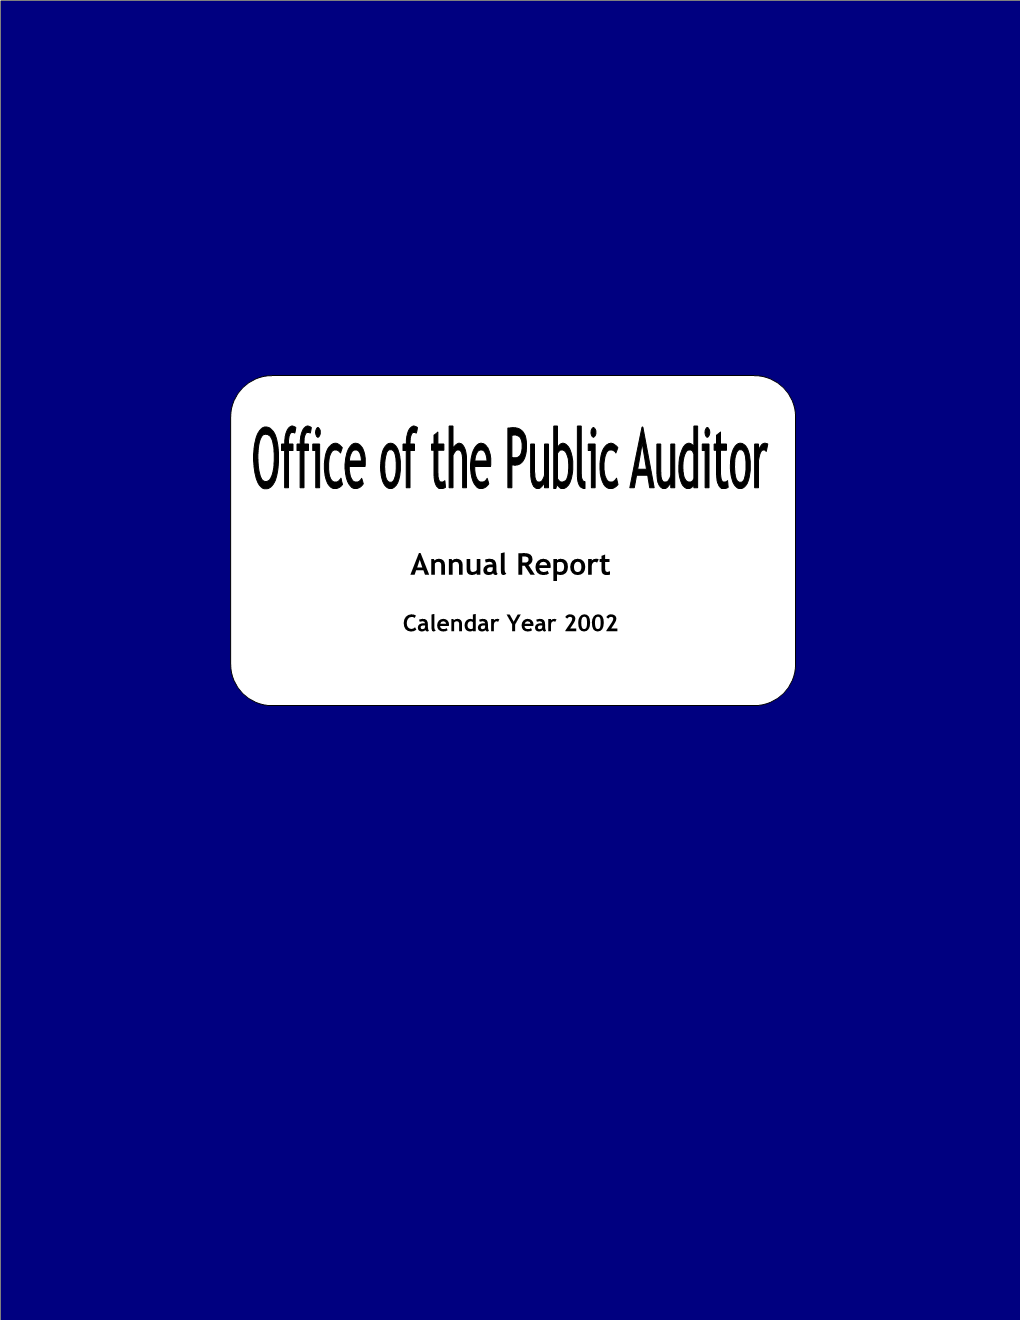 Message from the Public Auditor